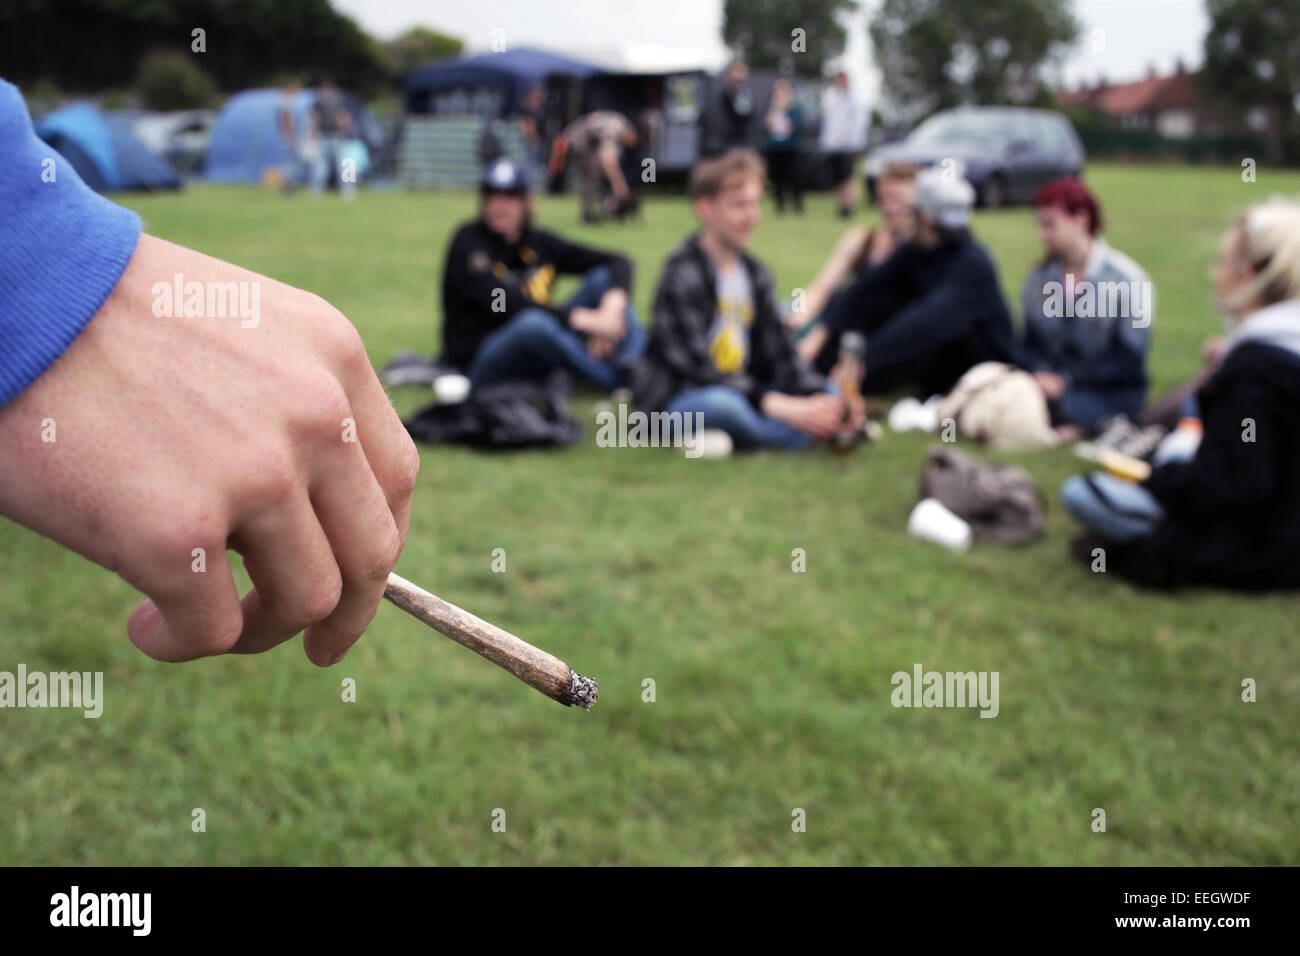 A skunk cannabis joint at a pro legalisation festival  in Redcar, Teesside, UK. 20/08/2014. Photograph: stuart Boulton/Alamy Stock Photo